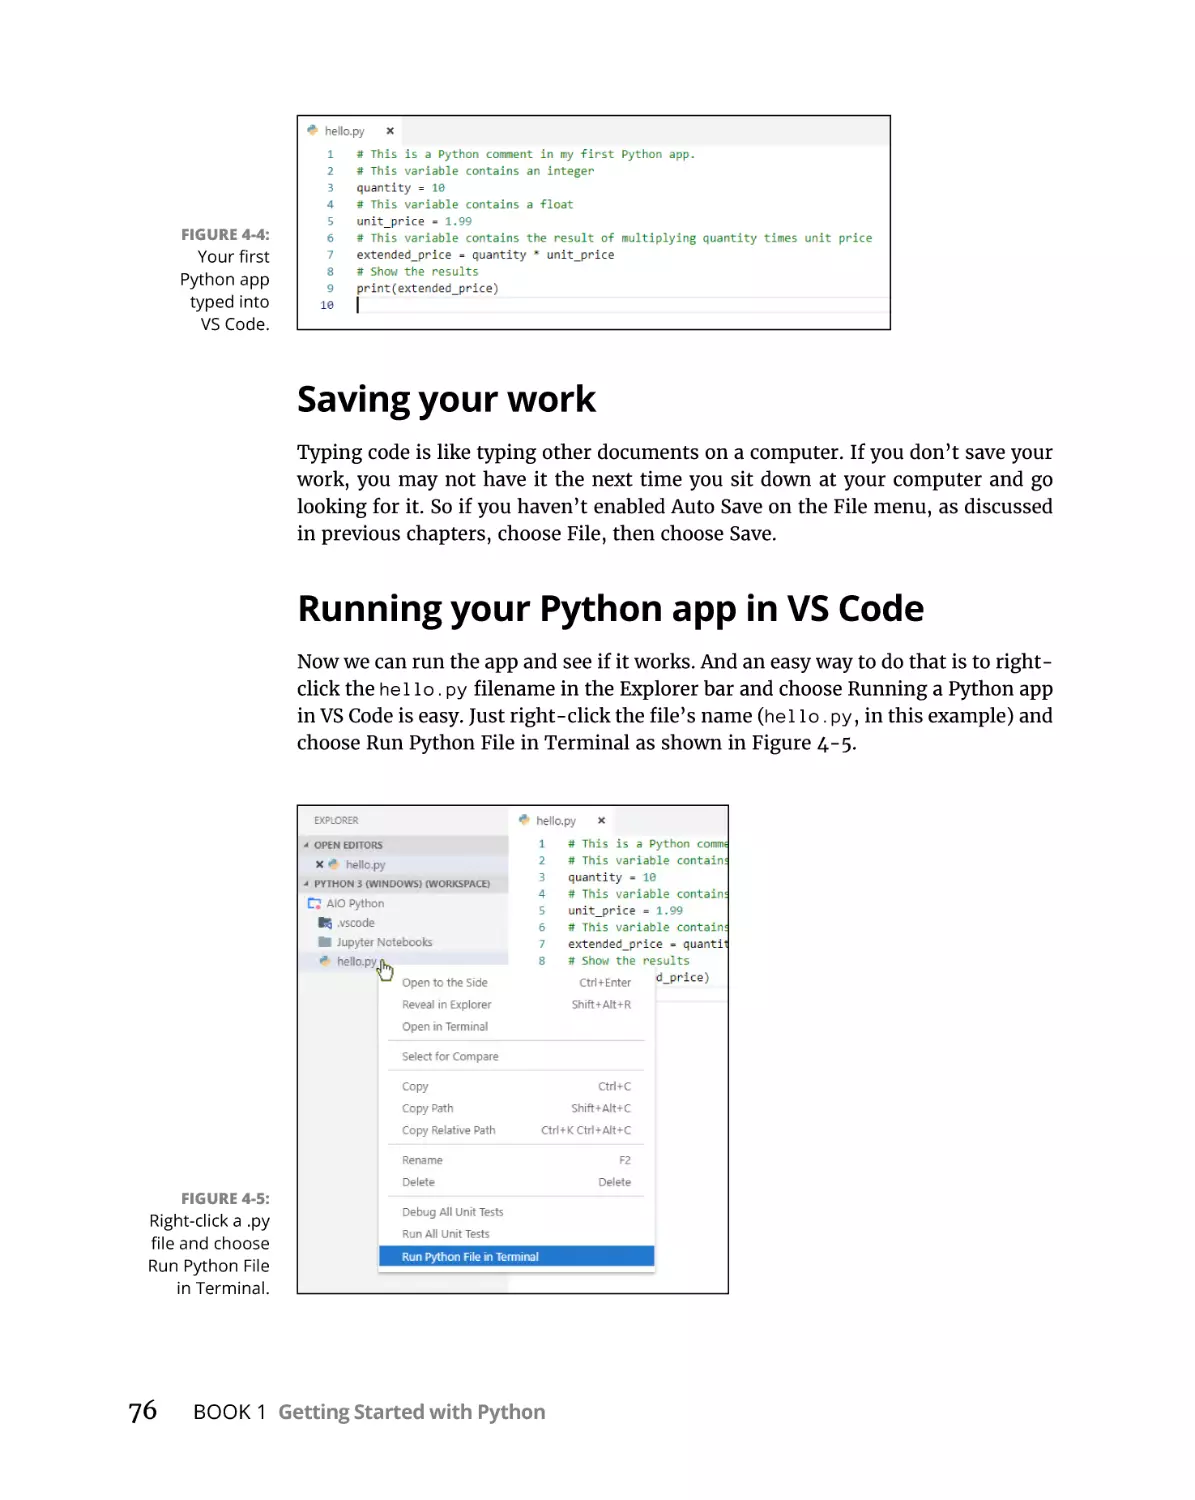 Saving your work
Running your Python app in VS Code